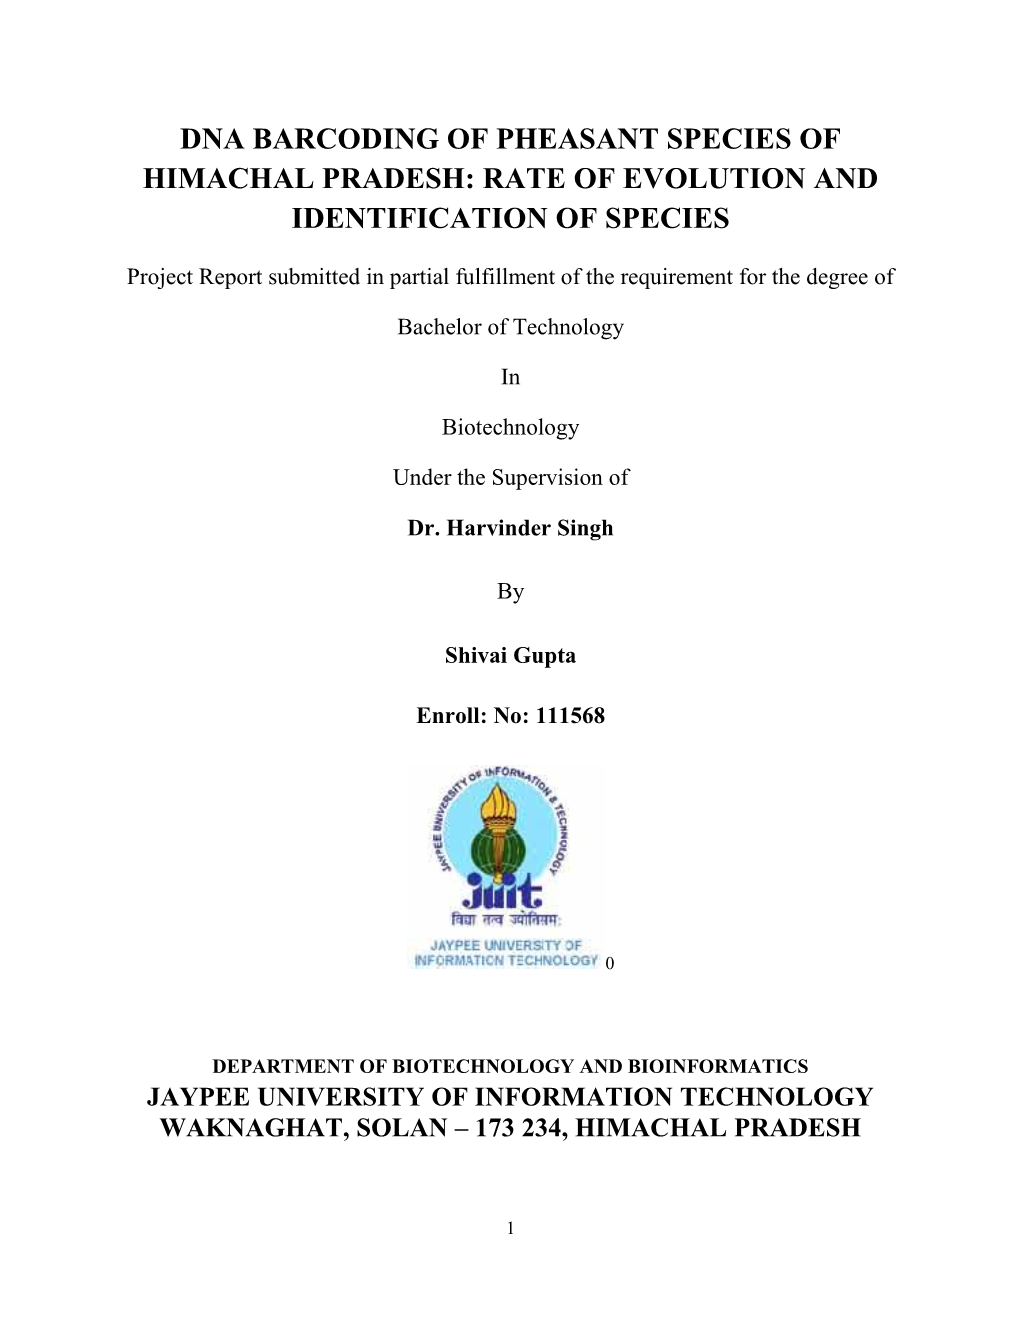 Dna Barcoding of Pheasant Species of Himachal Pradesh: Rate of Evolution and Identification of Species